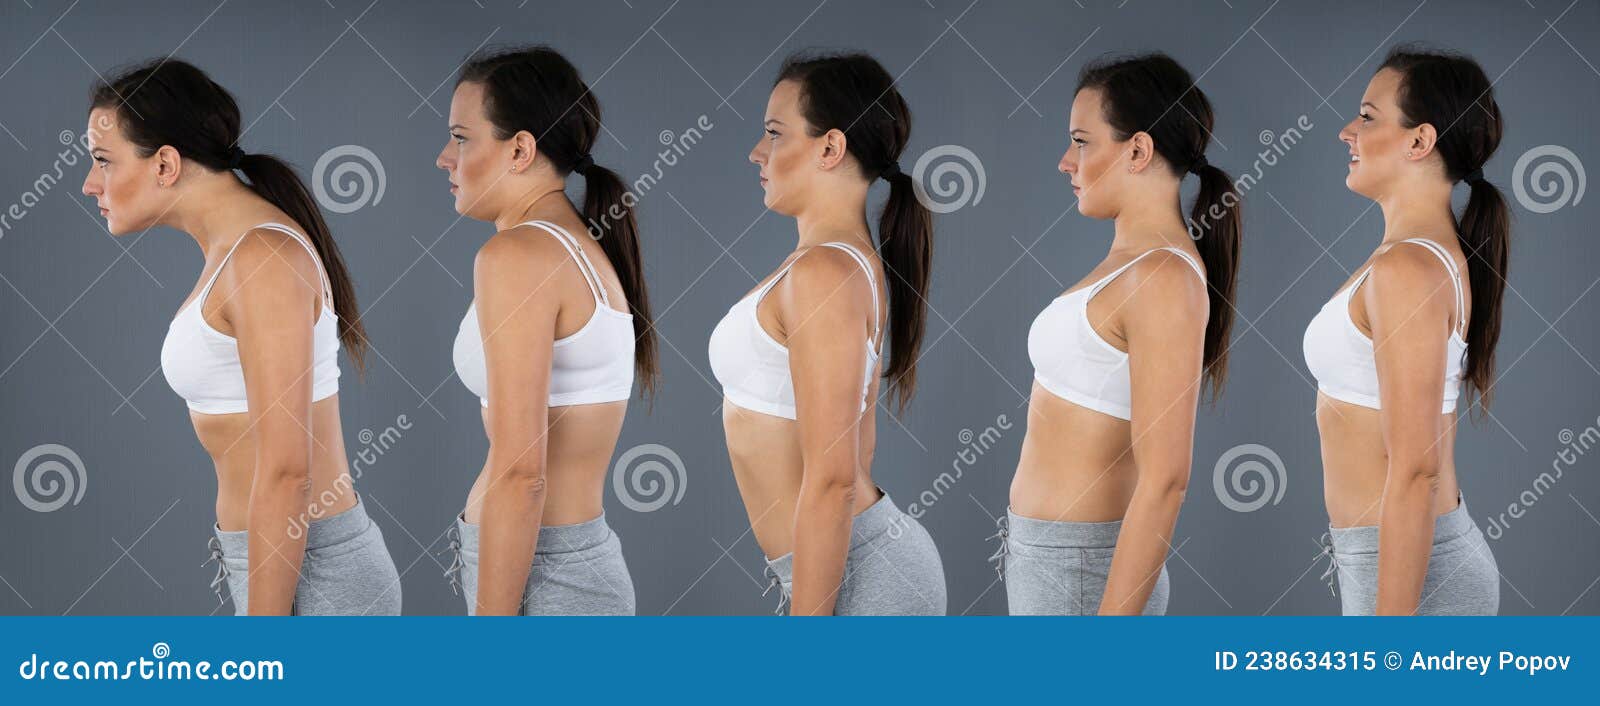 woman with lordosis, kyphosis, sway back and normal curvature